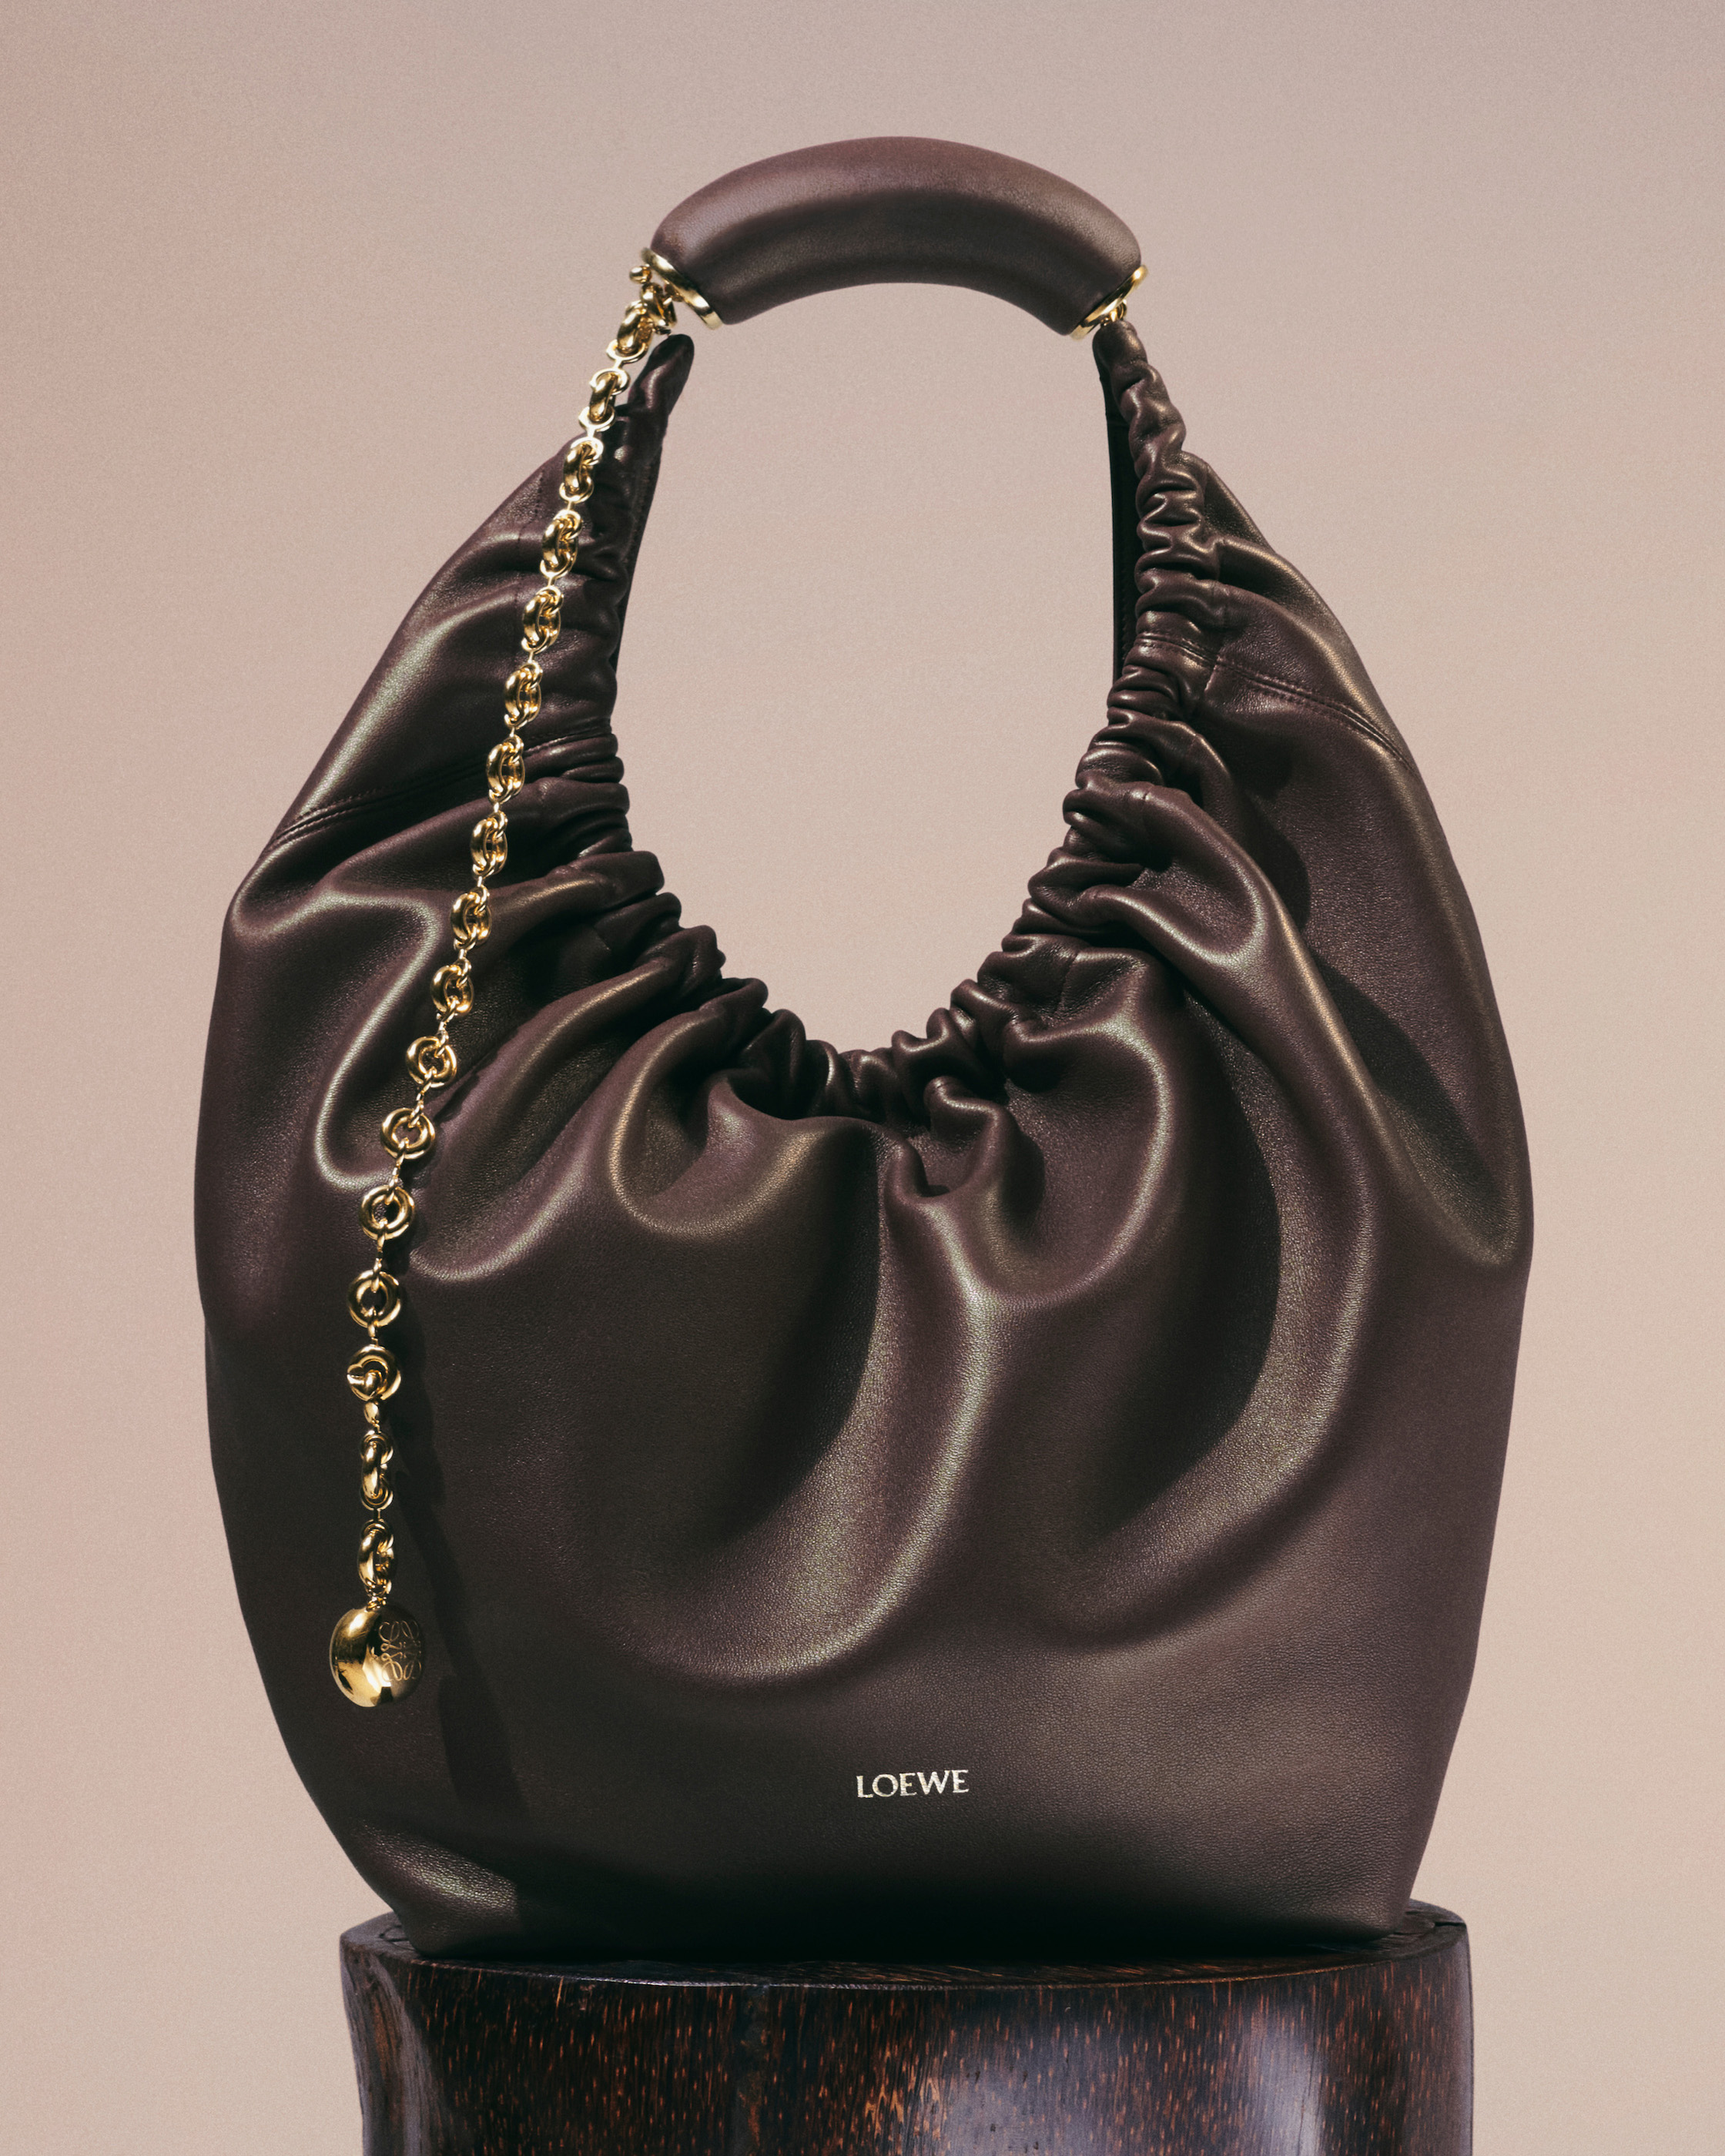 Loewe Squeeze Small leather shoulder bag